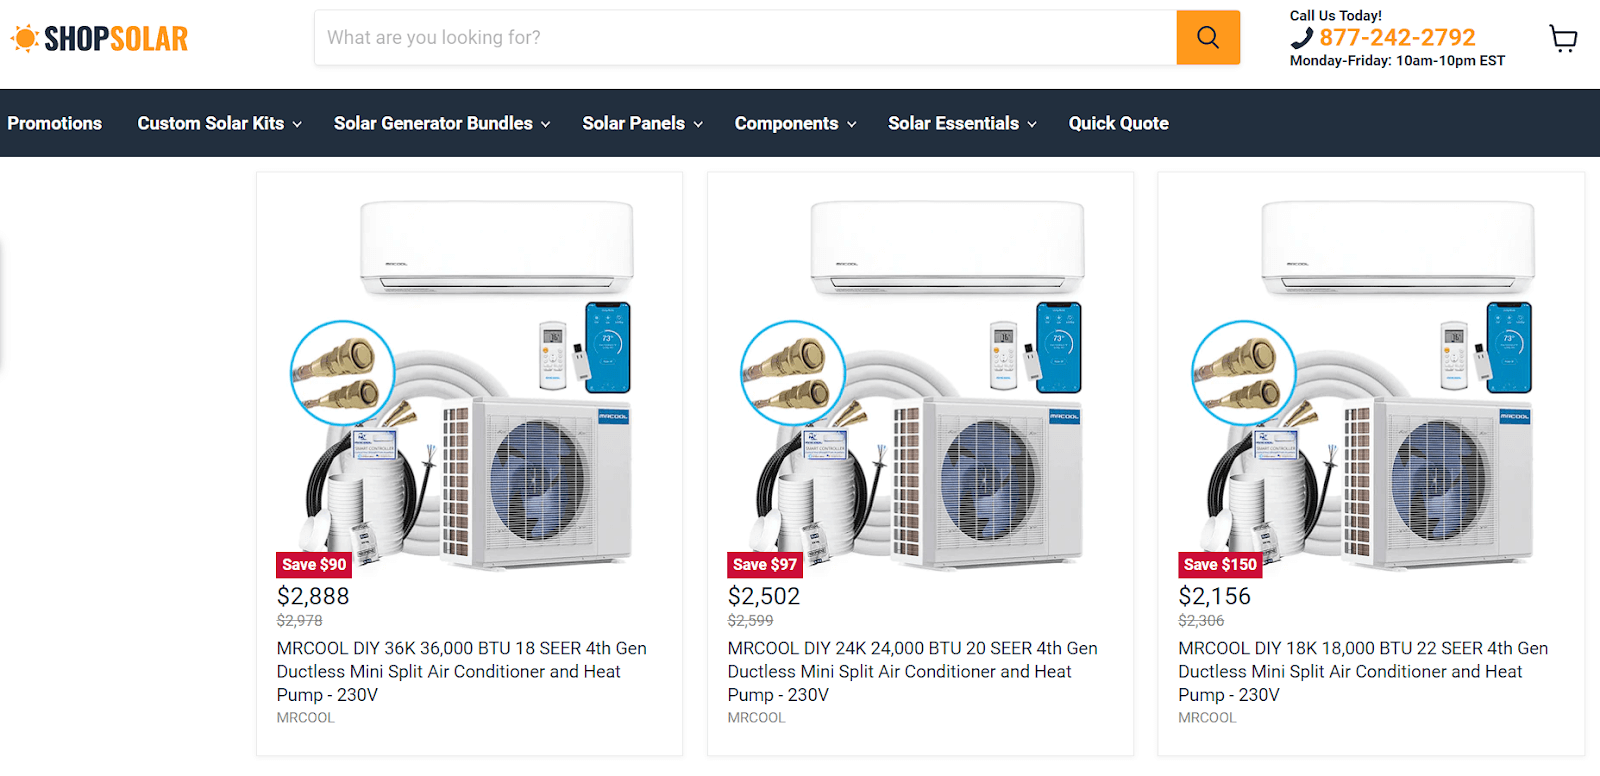 example of consistent product presentation online